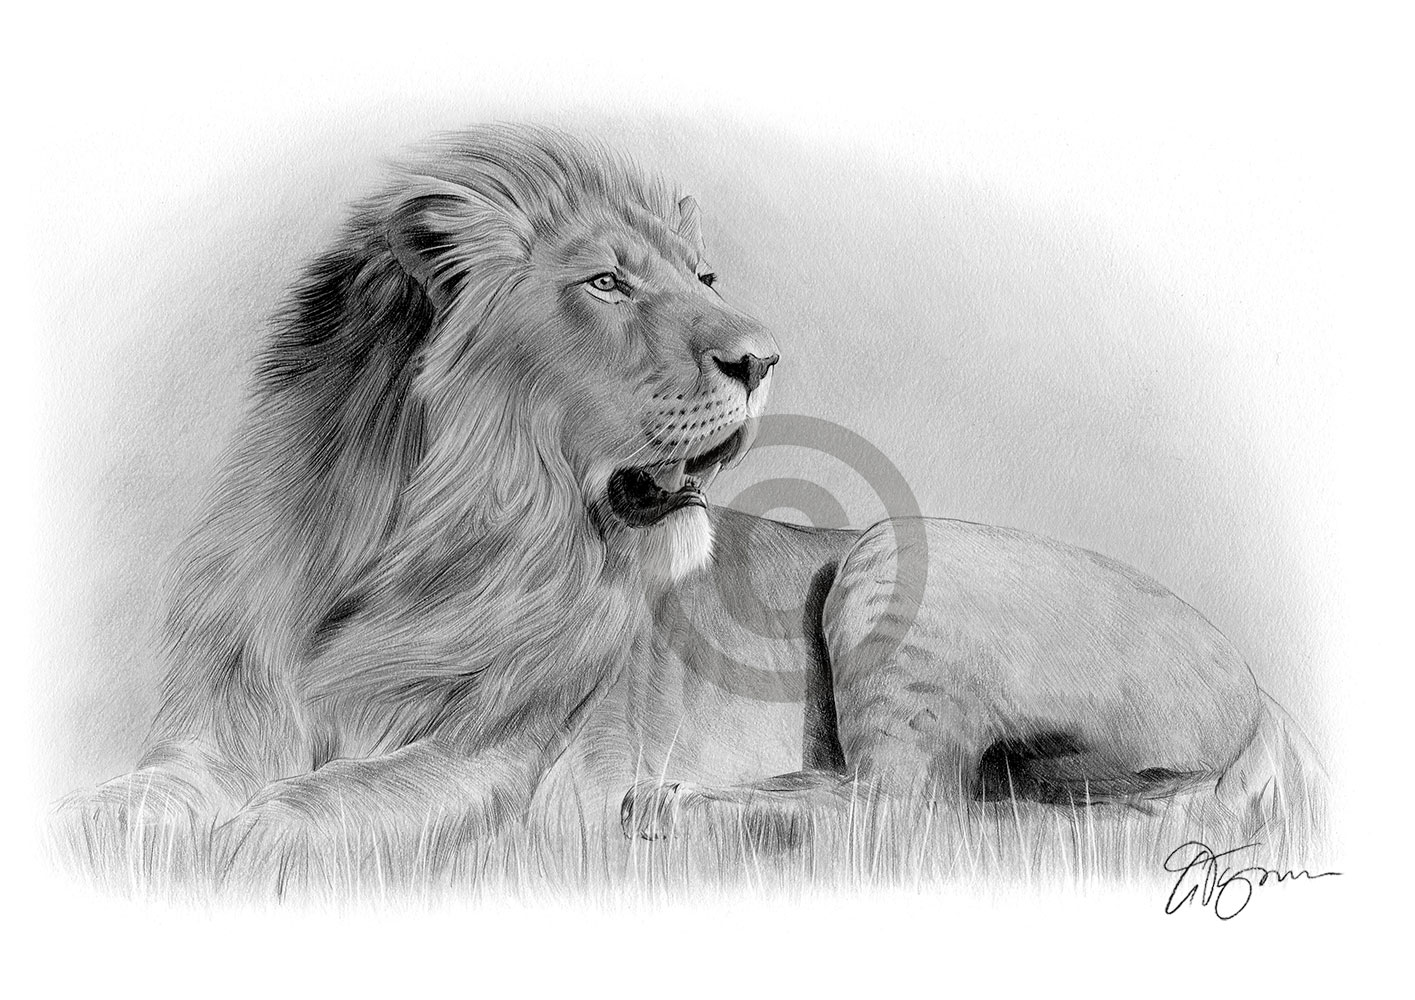 Pencil drawing of an African lion in landscape by artist Gary Tymon